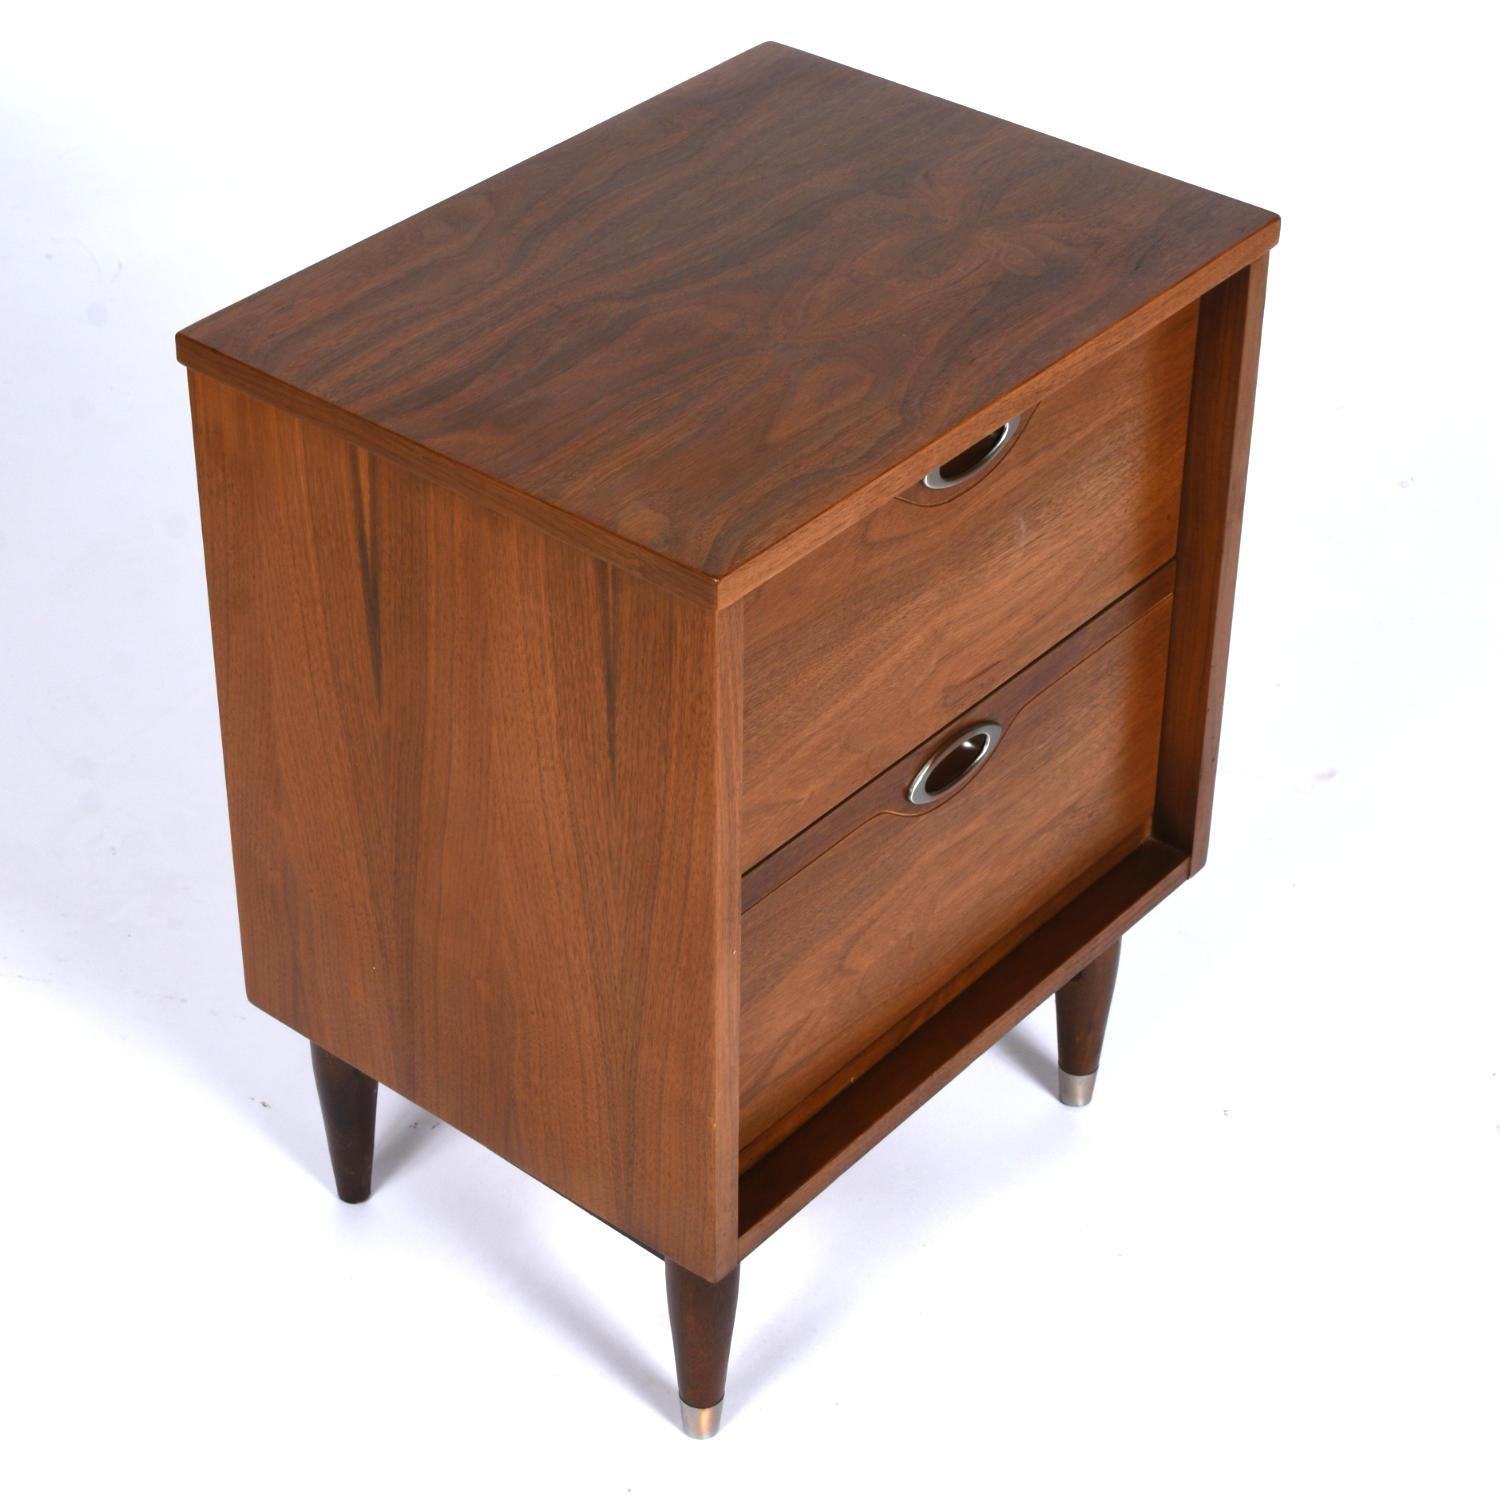 This listing is for a single nightstand. 

Handsome mid-century modern nightstand by Hooker. The Mainline collection features premium walnut casegoods. This Hooker Mainline nightstand is a workhorse when it comes to storage. Two ample drawers